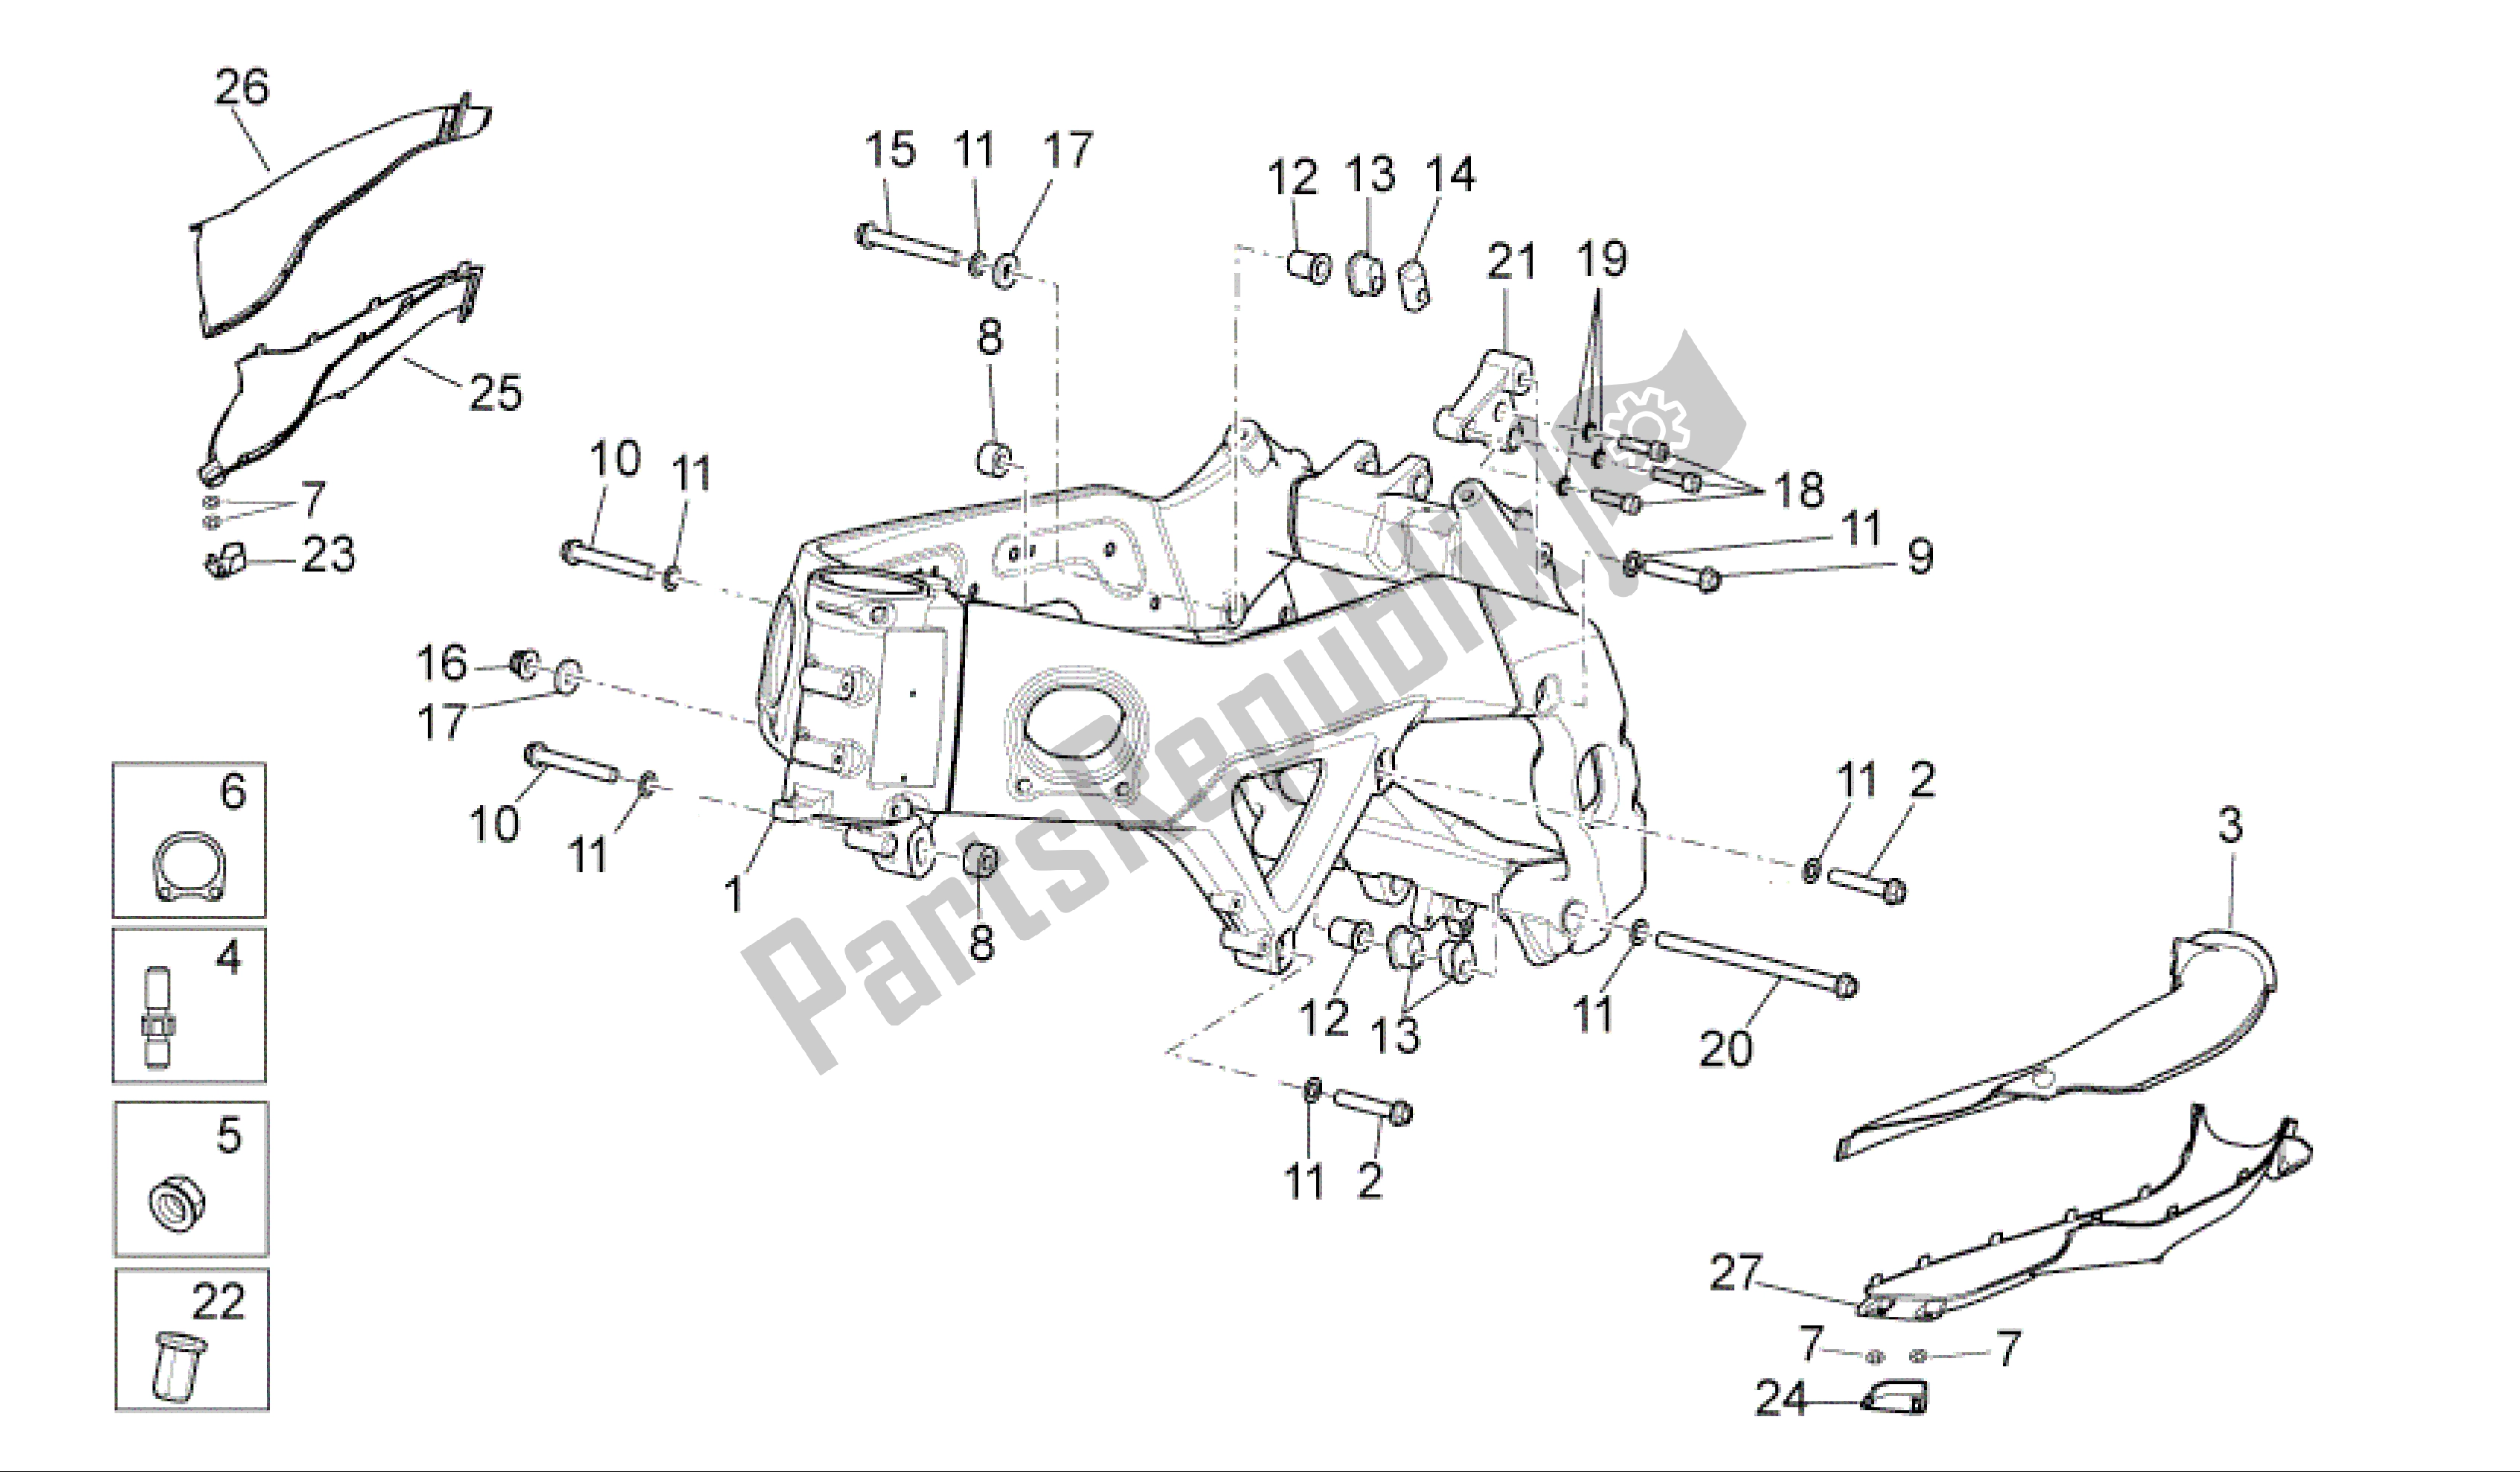 All parts for the Frame I of the Aprilia RSV4 R 3980 1000 2009 - 2010